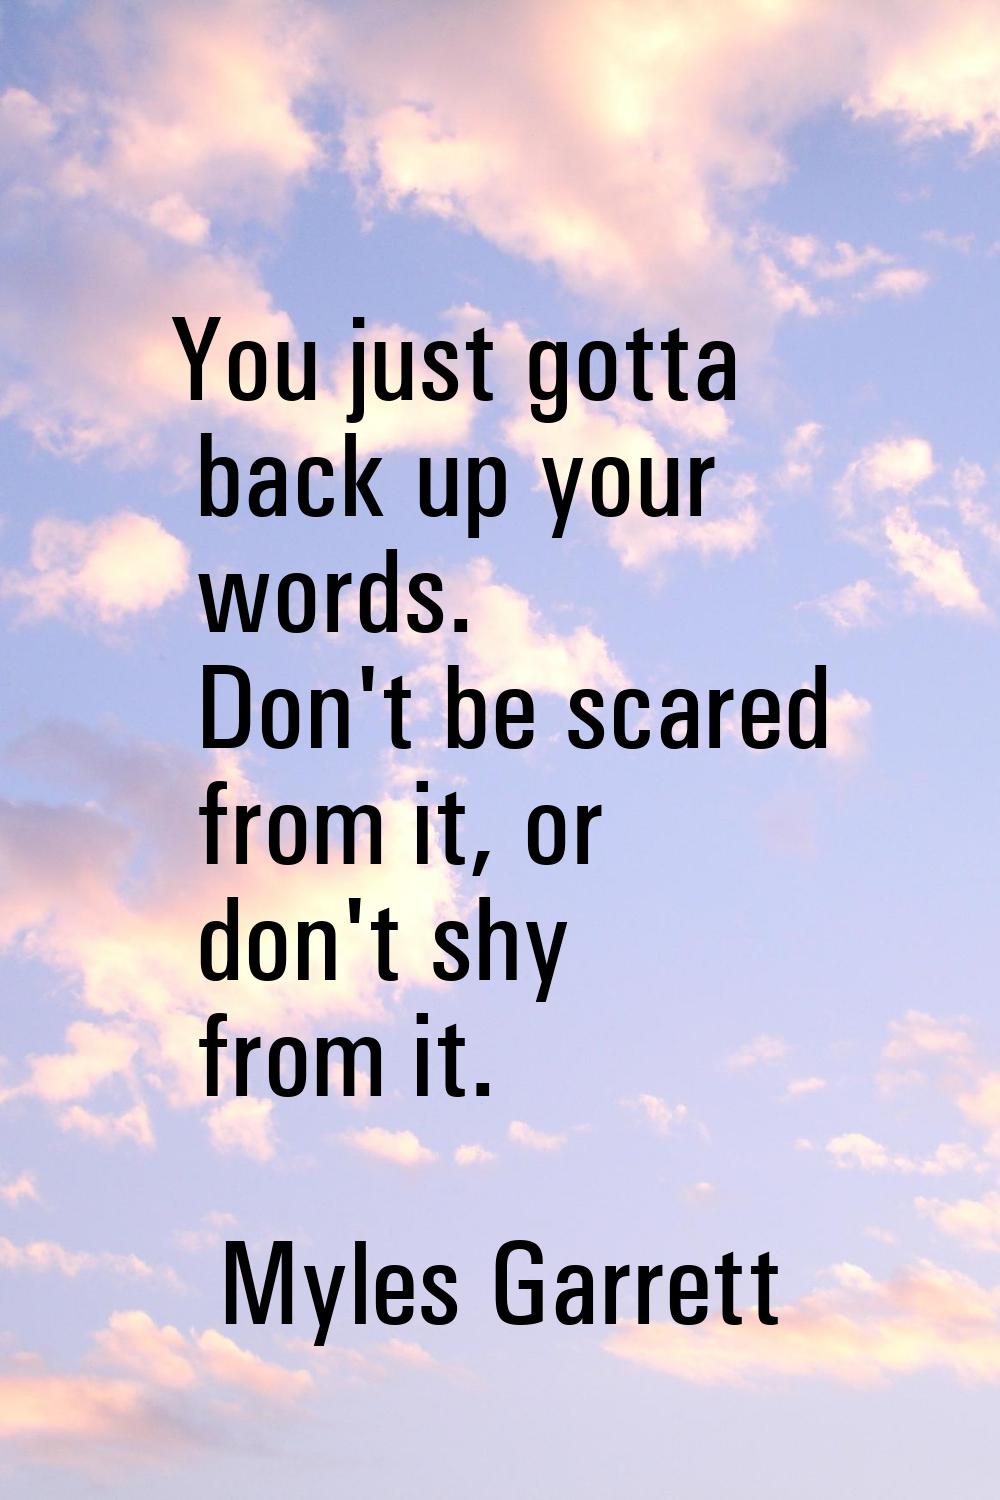 You just gotta back up your words. Don't be scared from it, or don't shy from it.